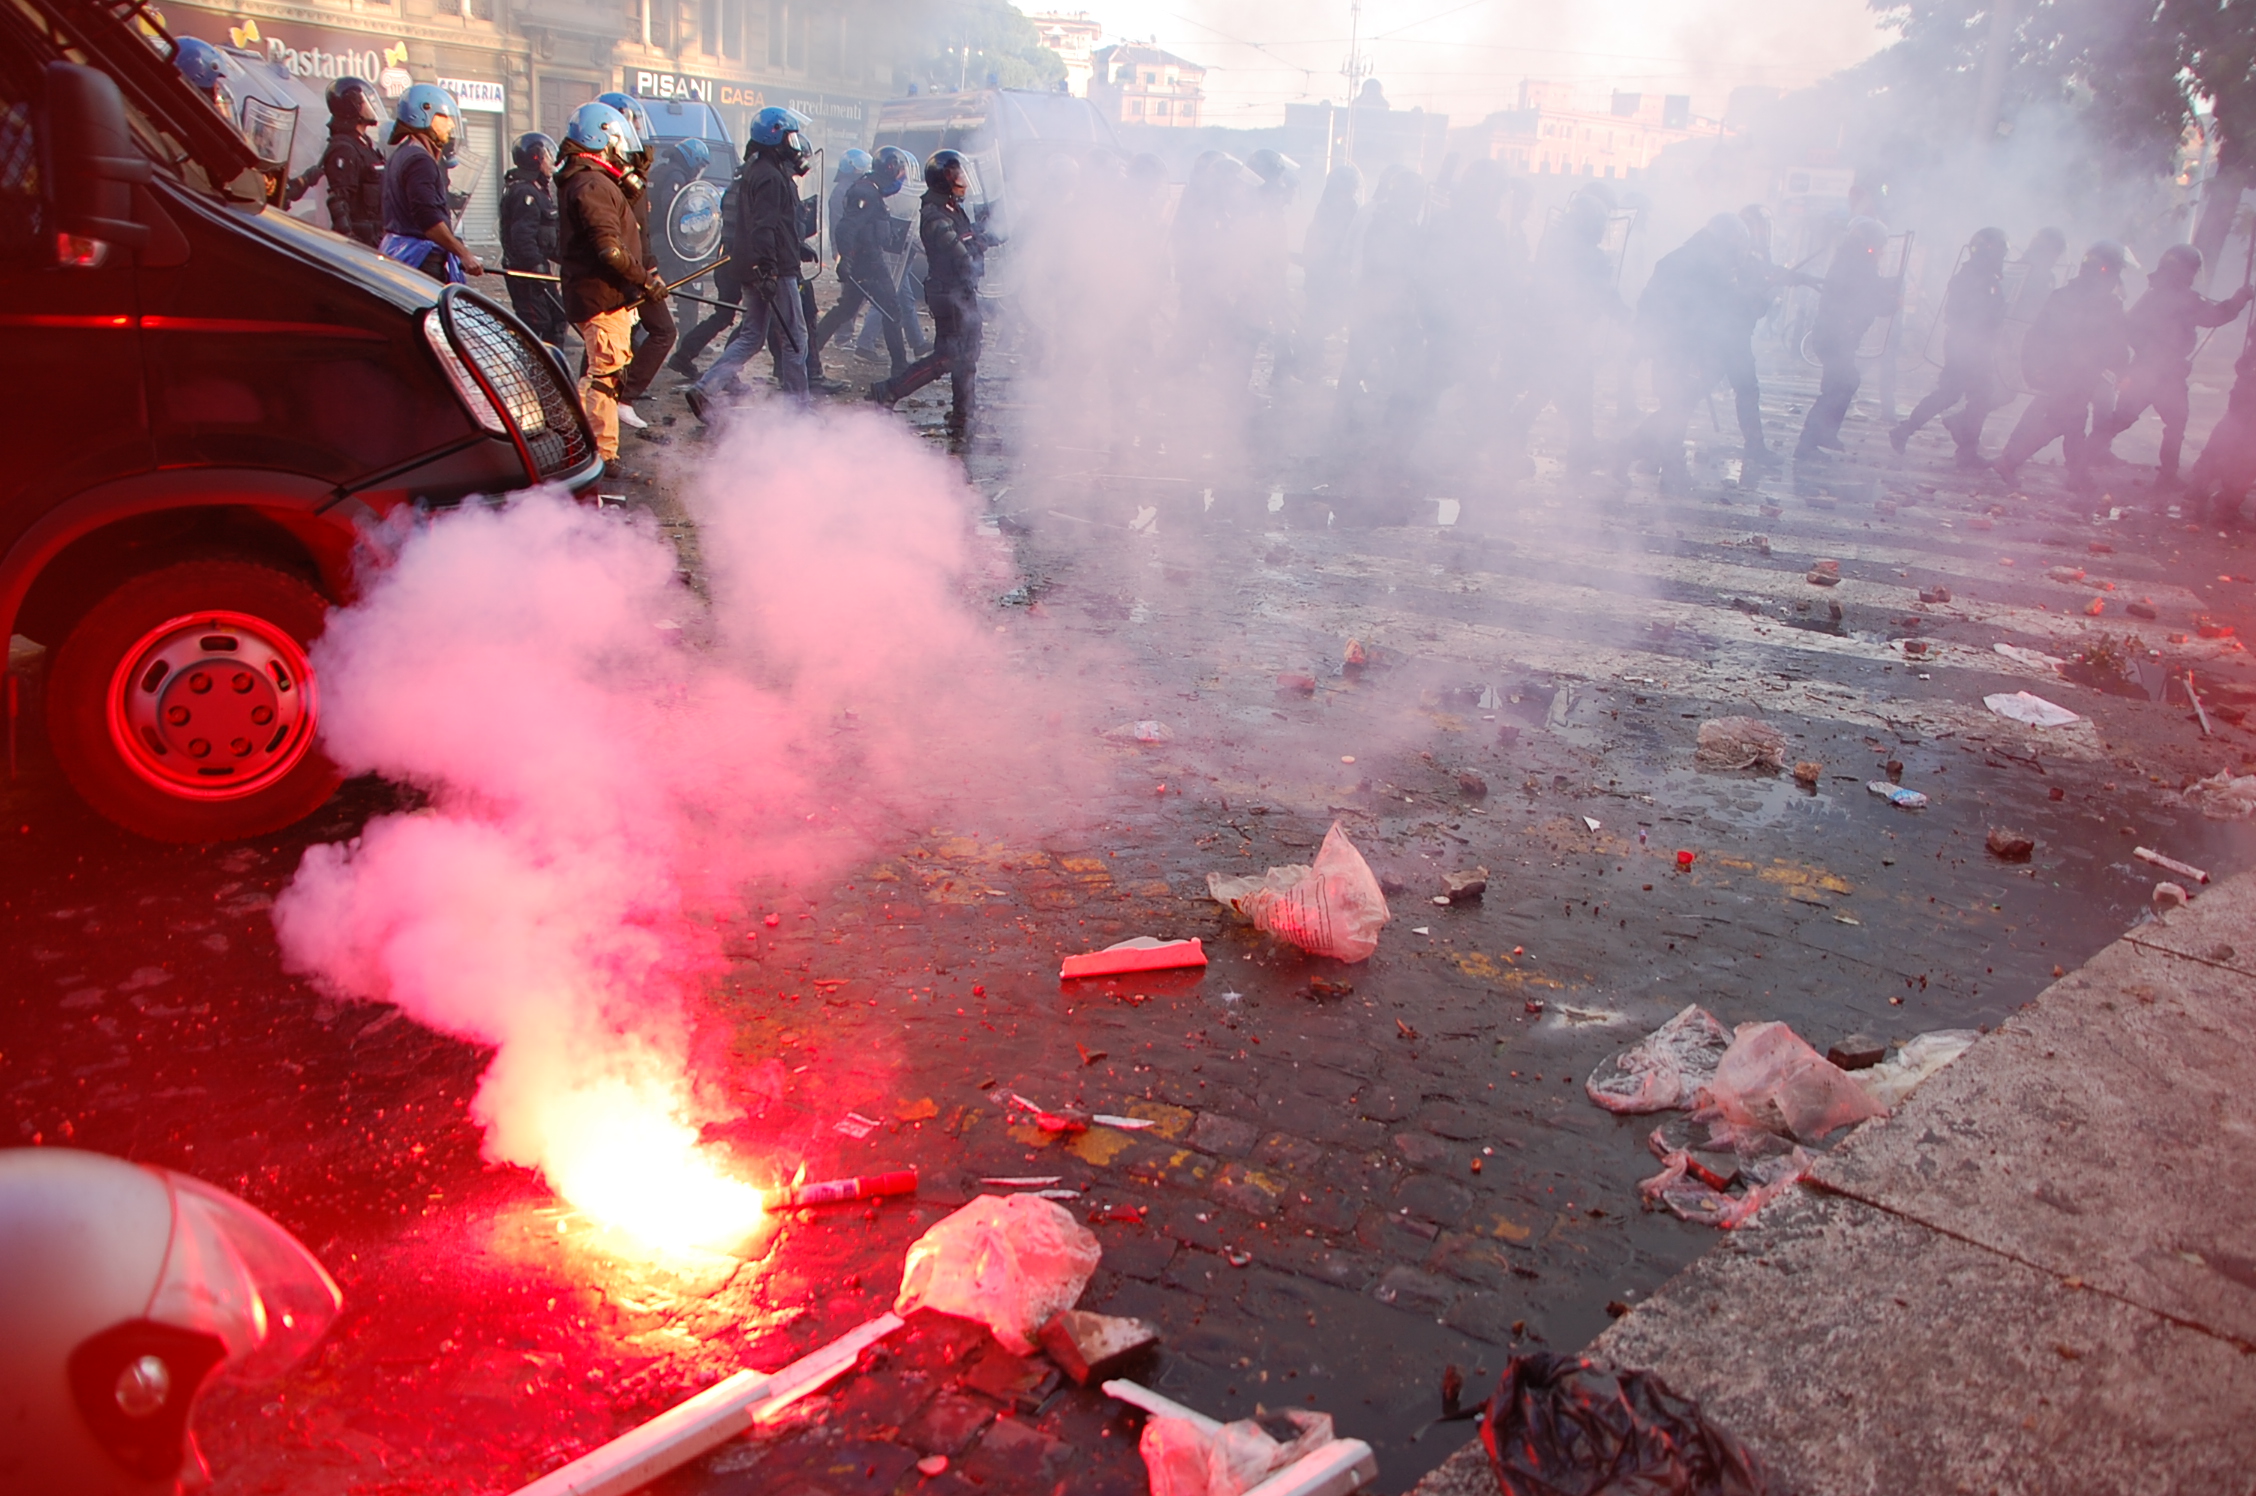 Clashes with riot police in Rome · Global Voices